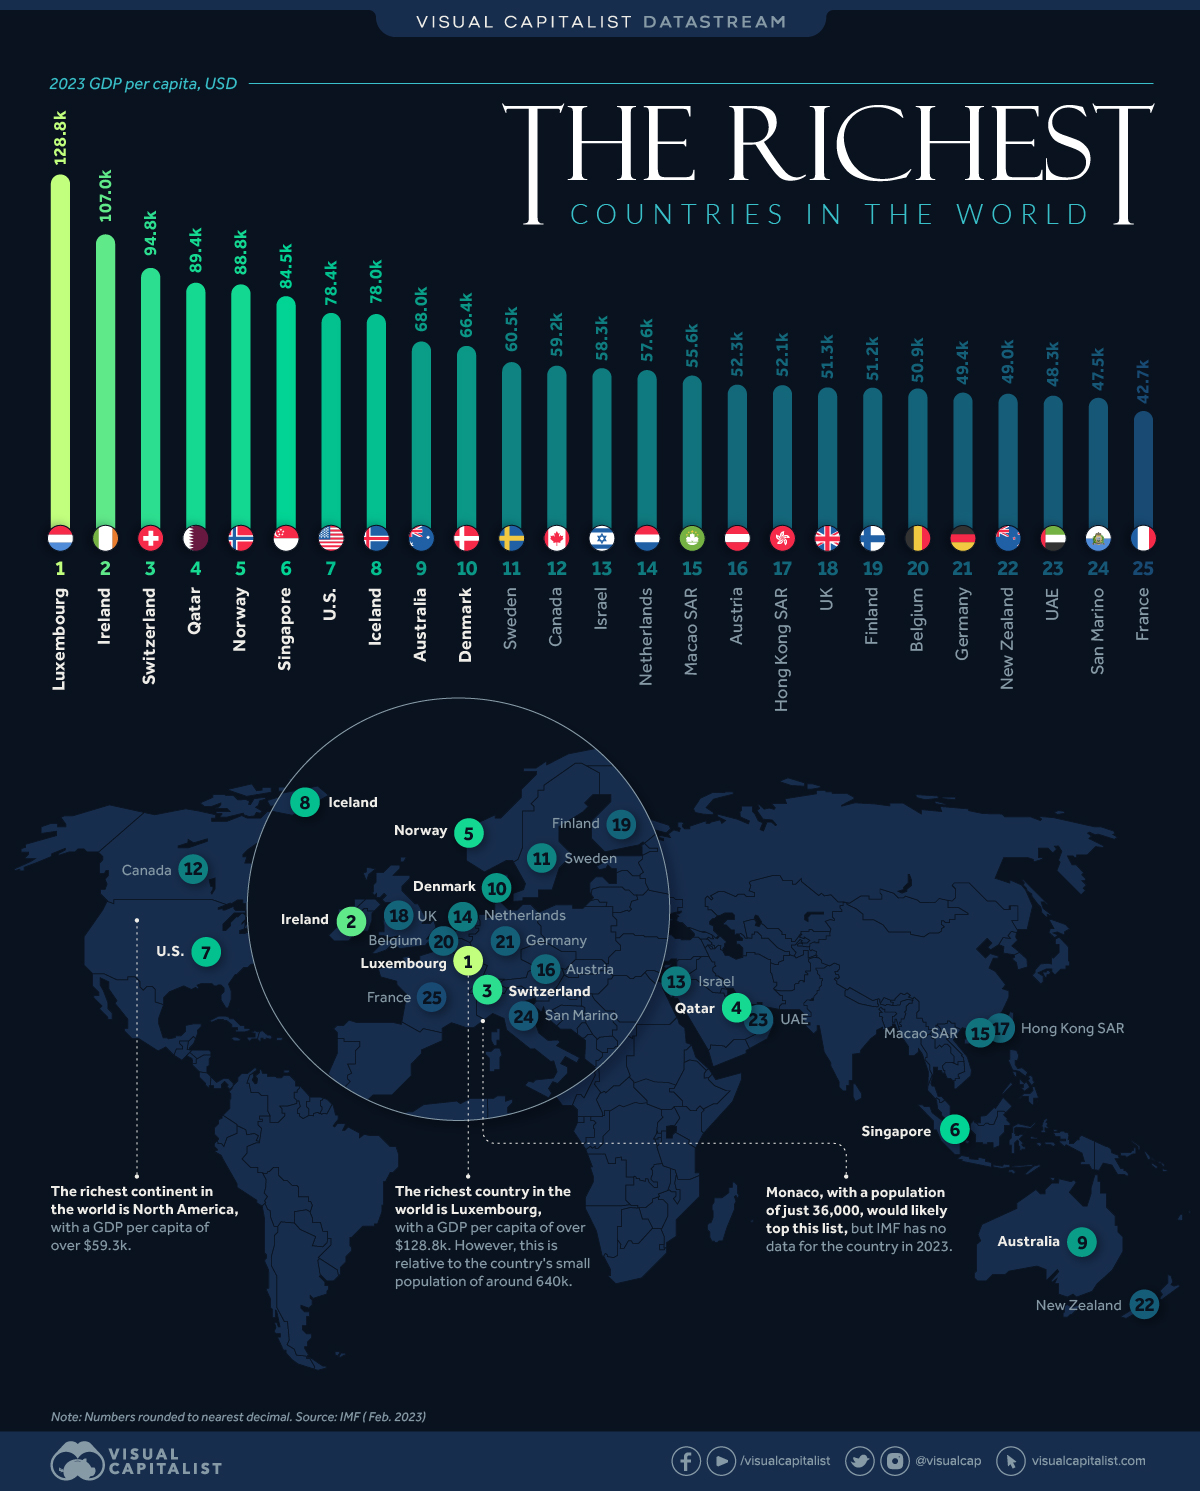 Ranked: The Top 20 Countries for Ultra High Net Worth Individuals